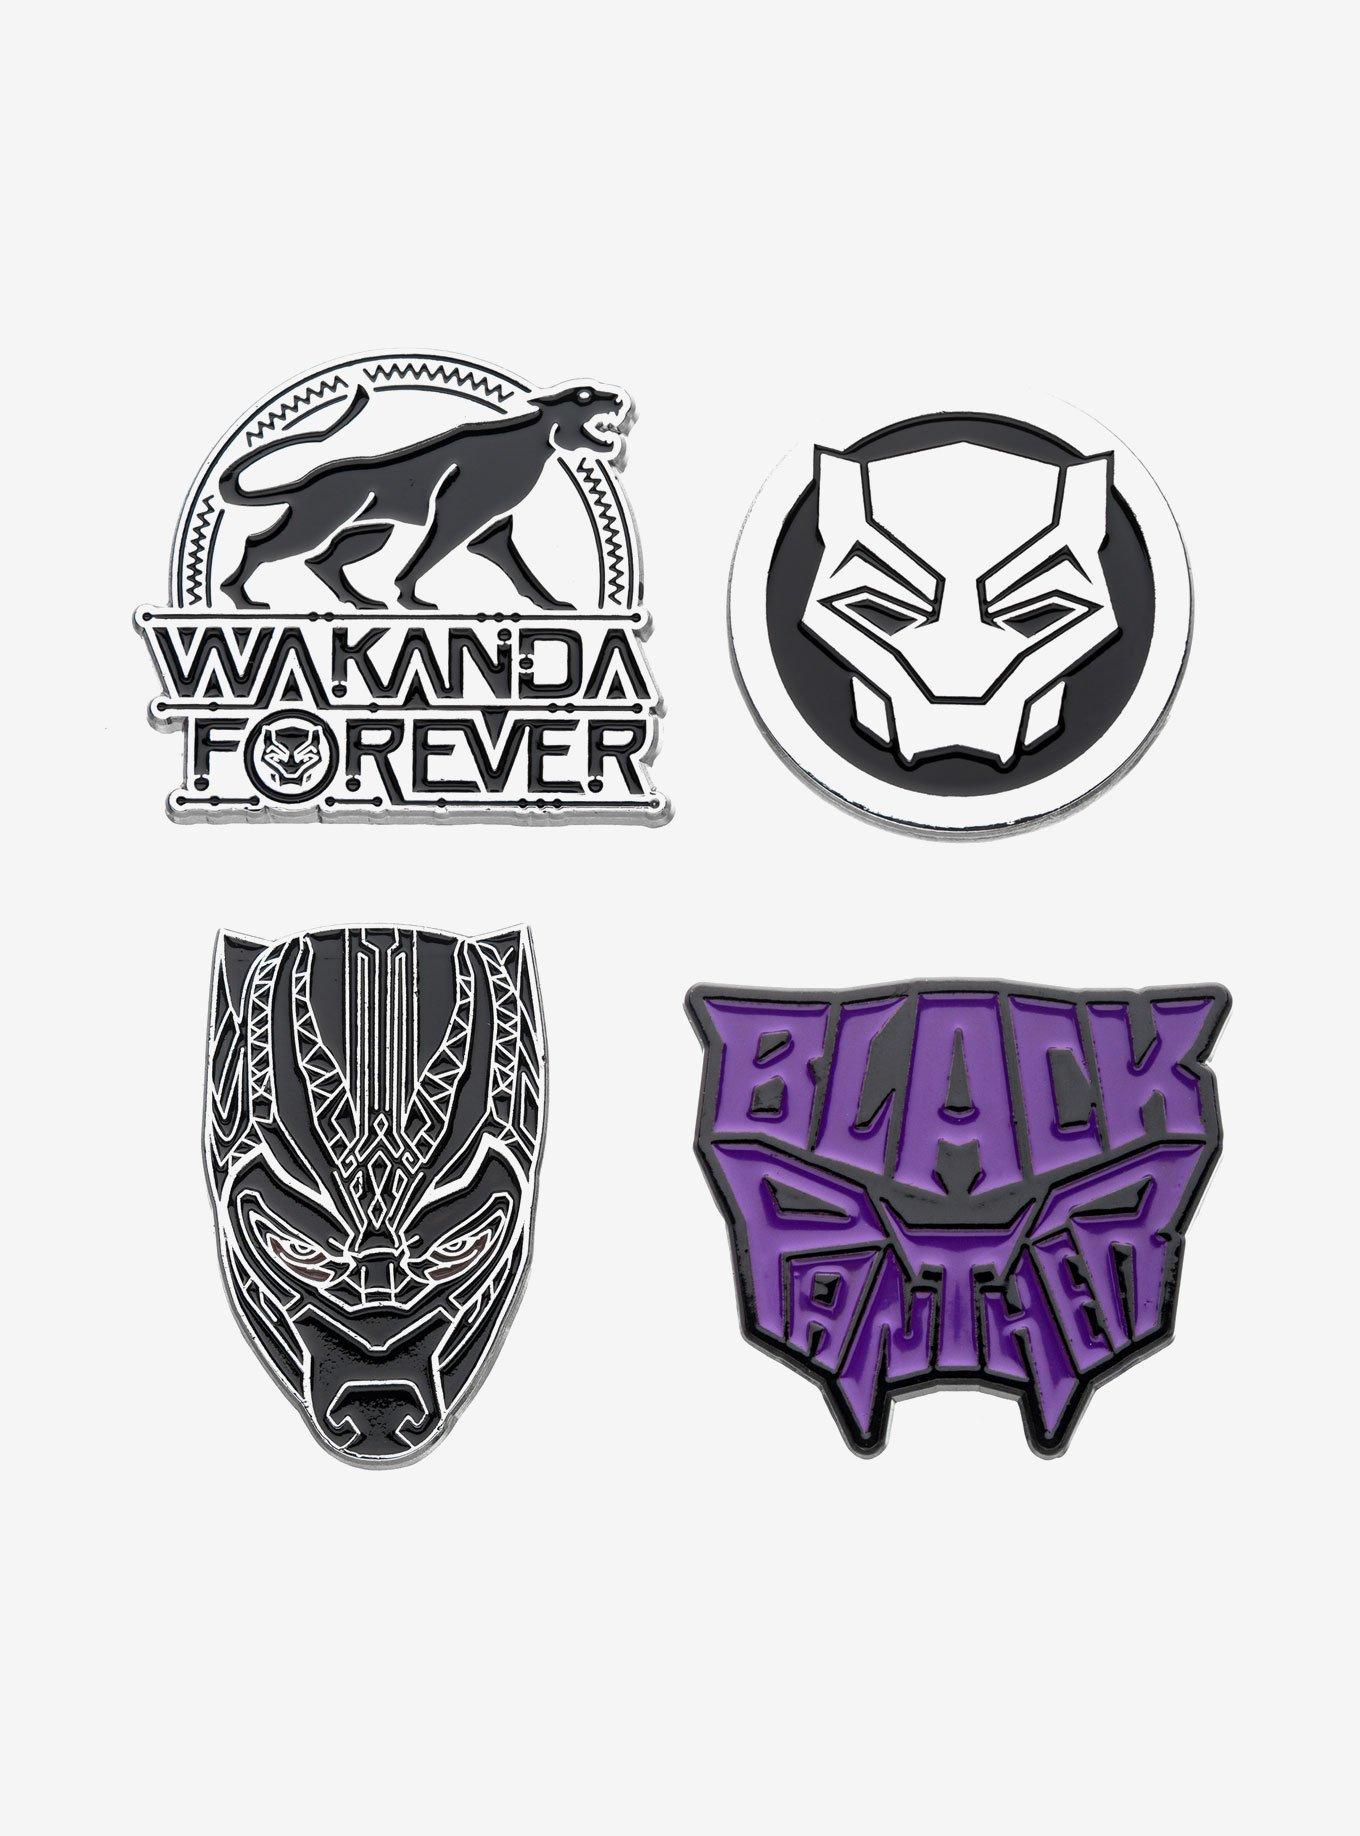 Black Panther Wakanda Wrestling Gear Collection